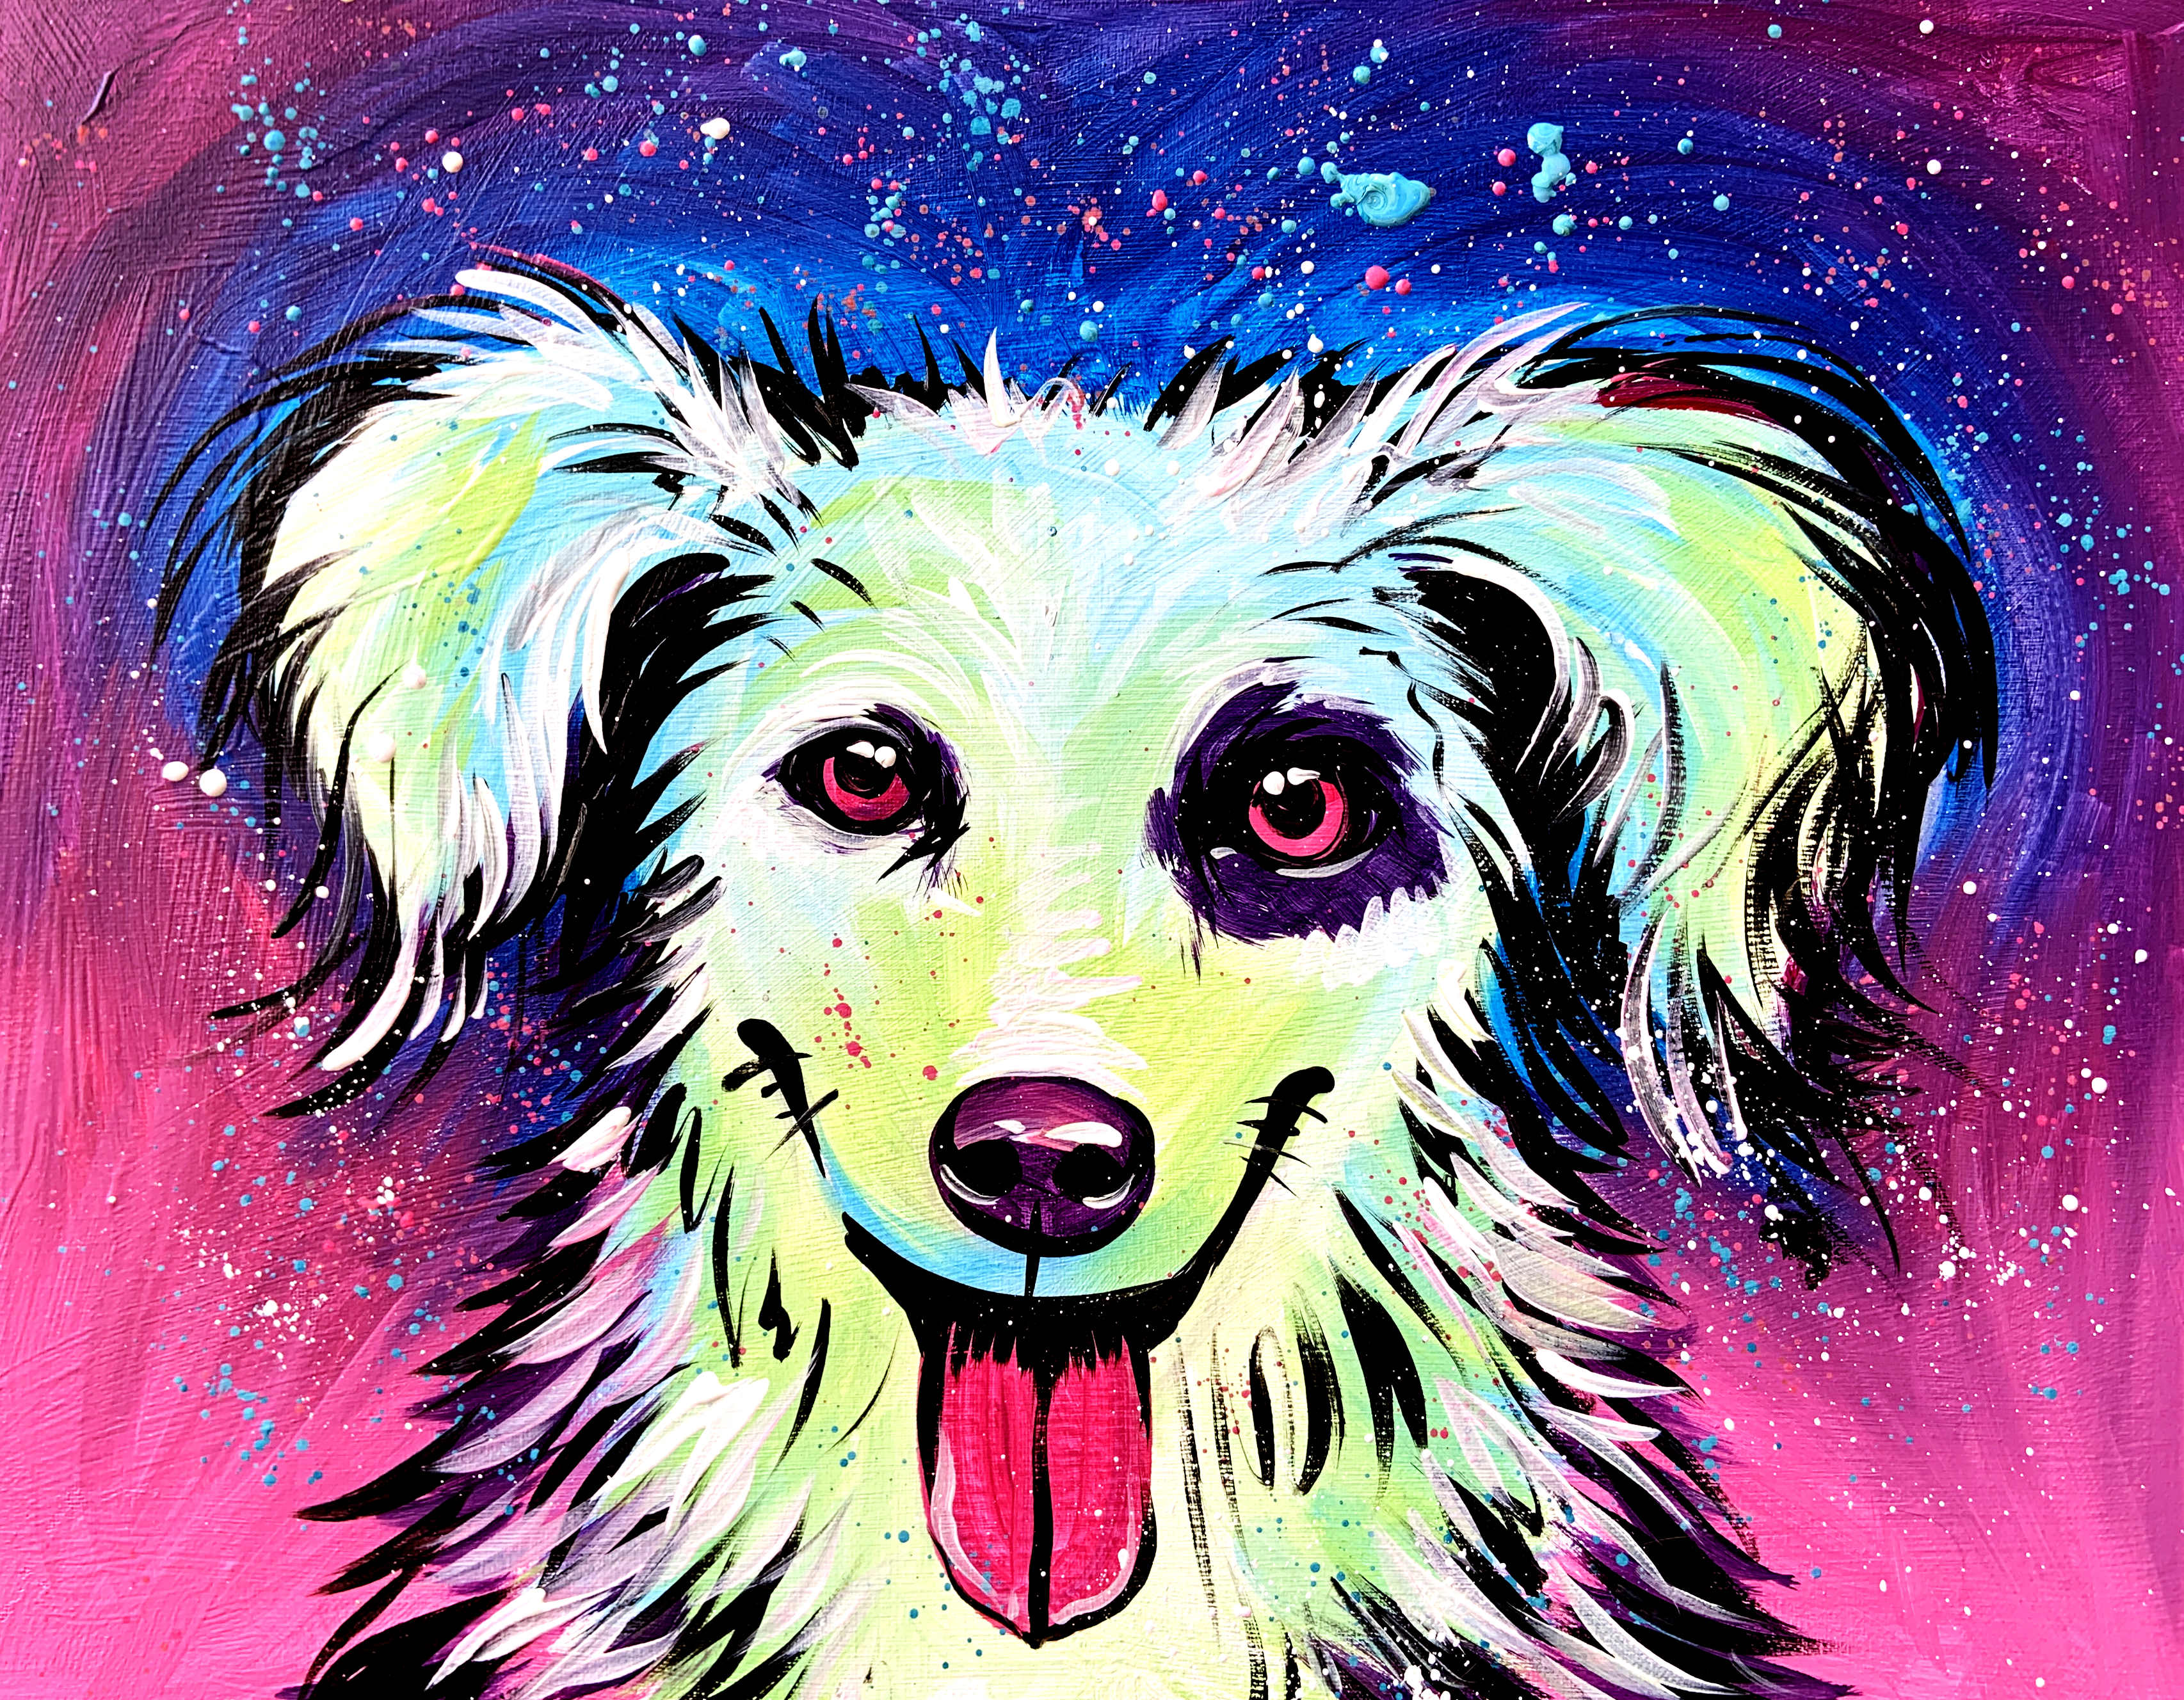 A Space Dog experience project by Yaymaker